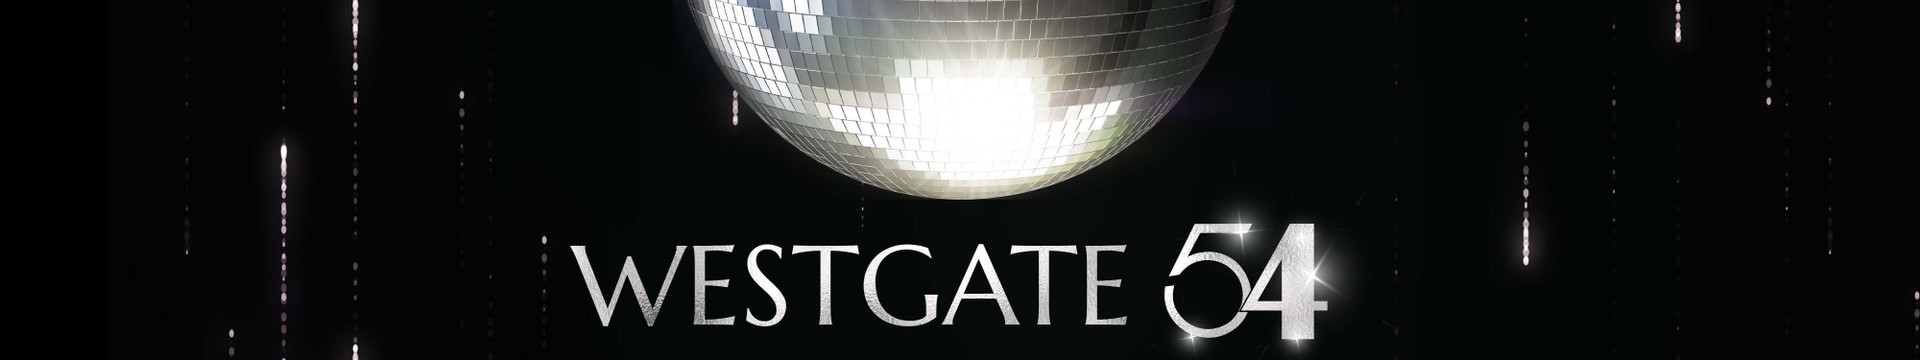 Las Vegas New Years Eve Vacation Package - Westgate 54 Disco Ball